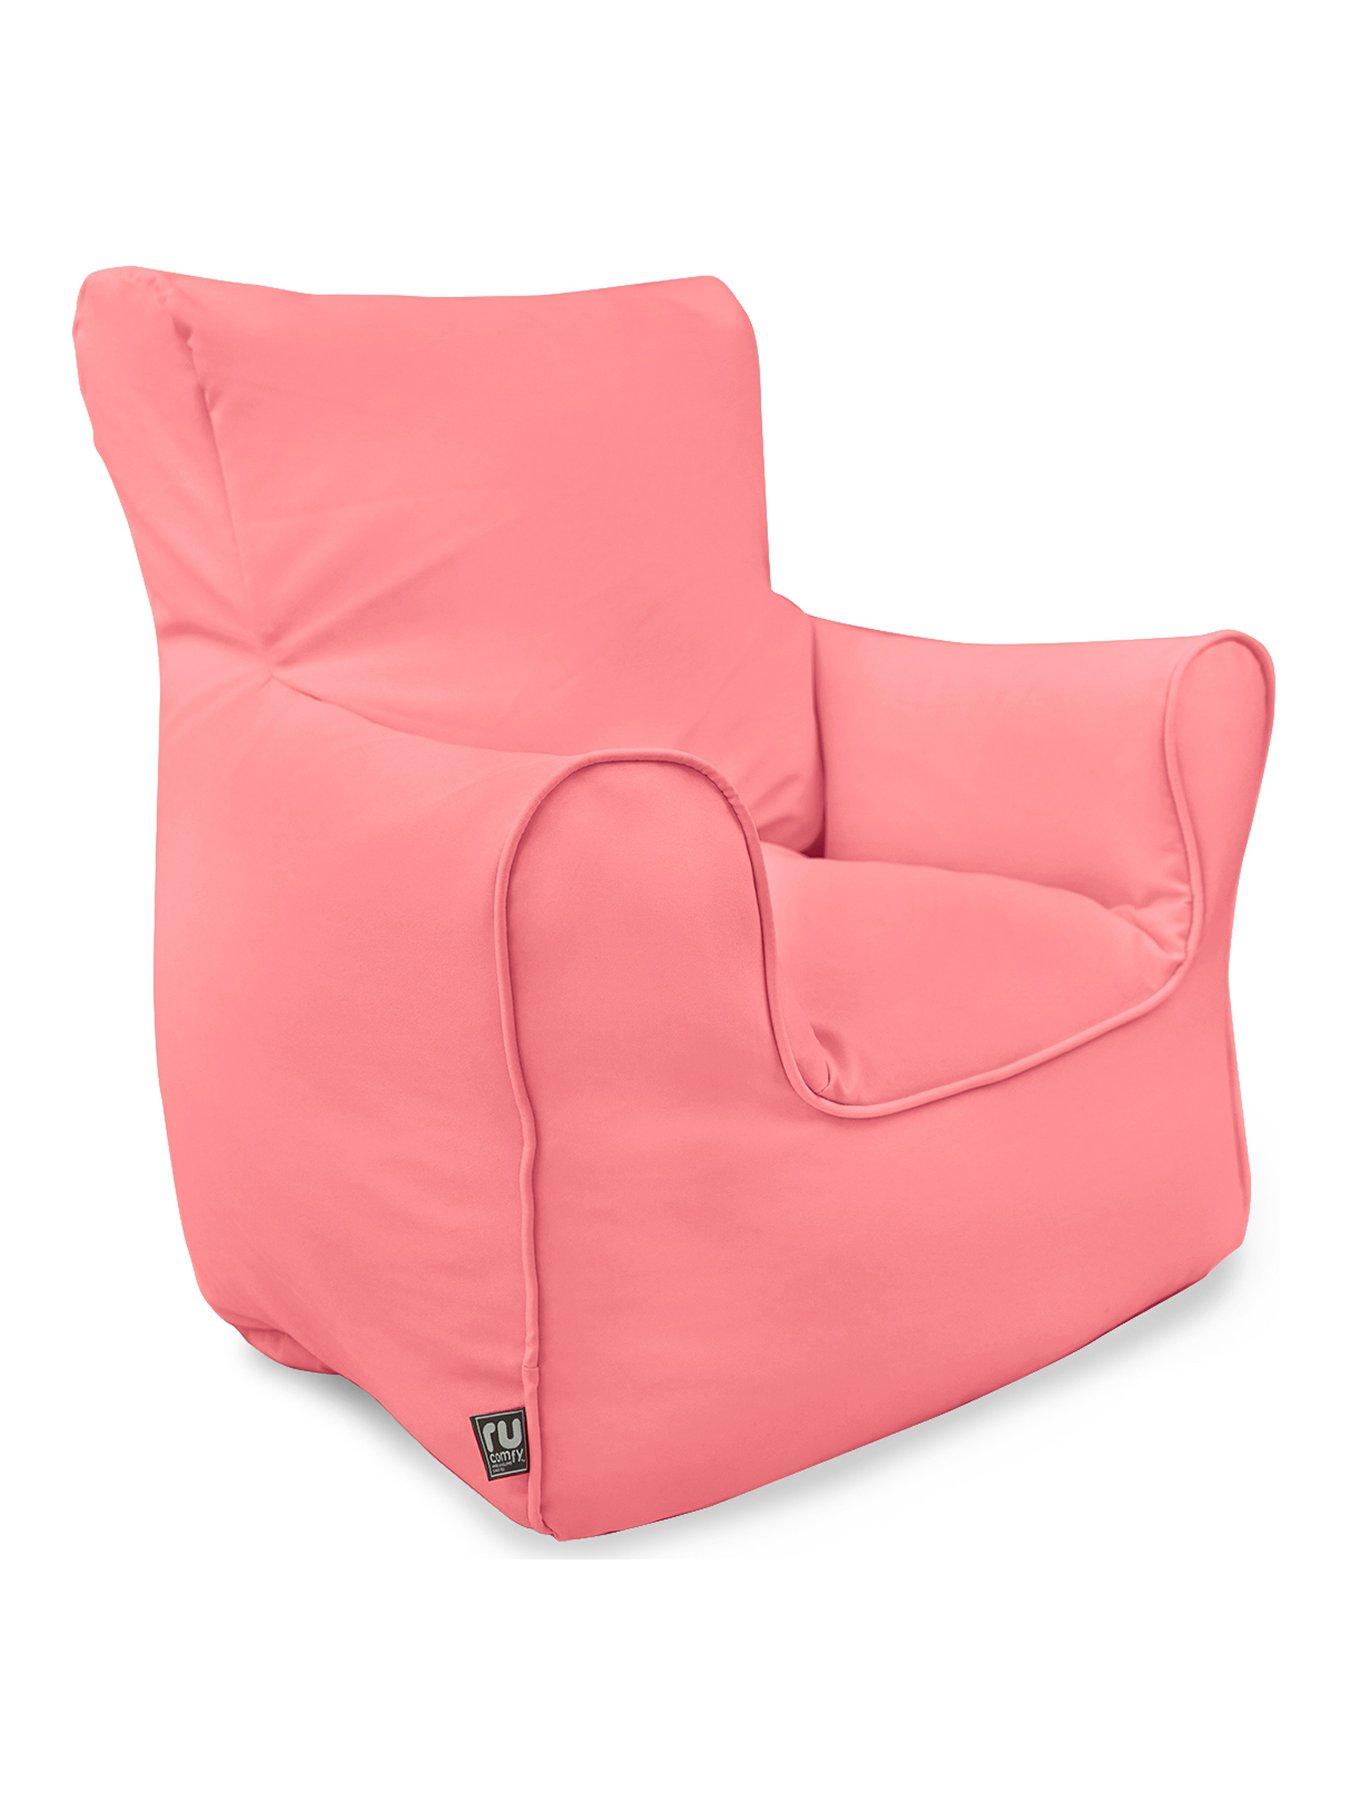 Teens Kids Furniture Bedroom And Details about   Posh Bean Bag Chair Sports Bean Bag For Kids 